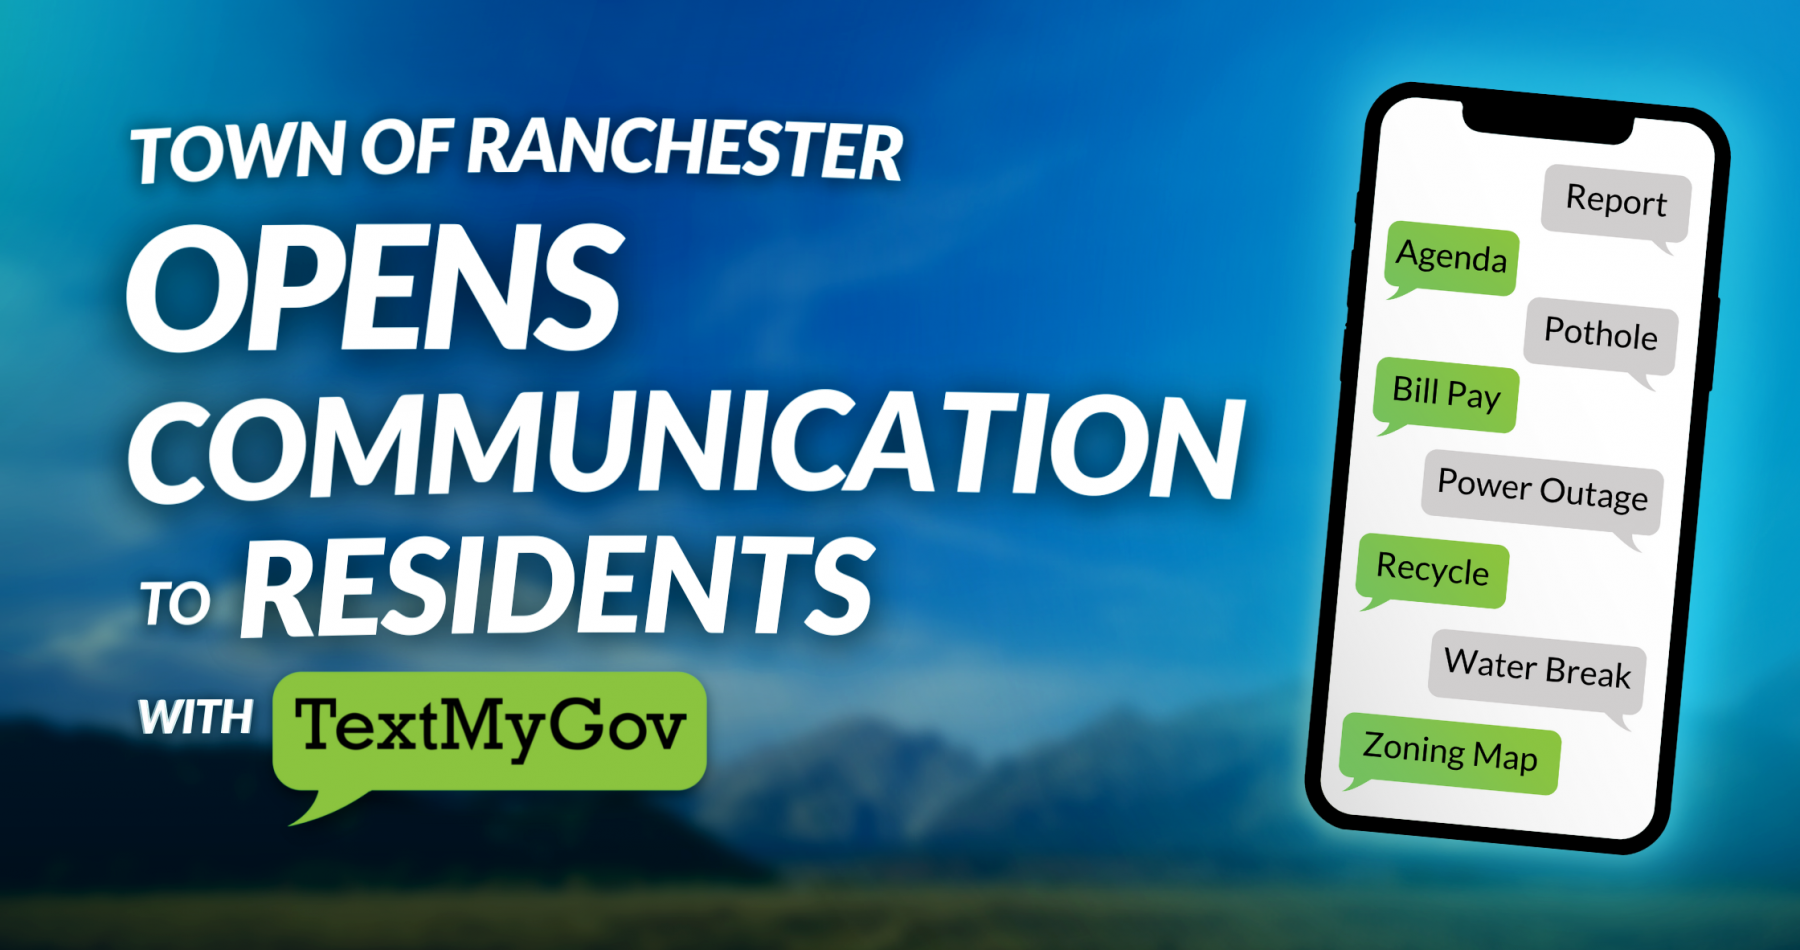 Town of Ranchester opens communication to residents with TextMyGov